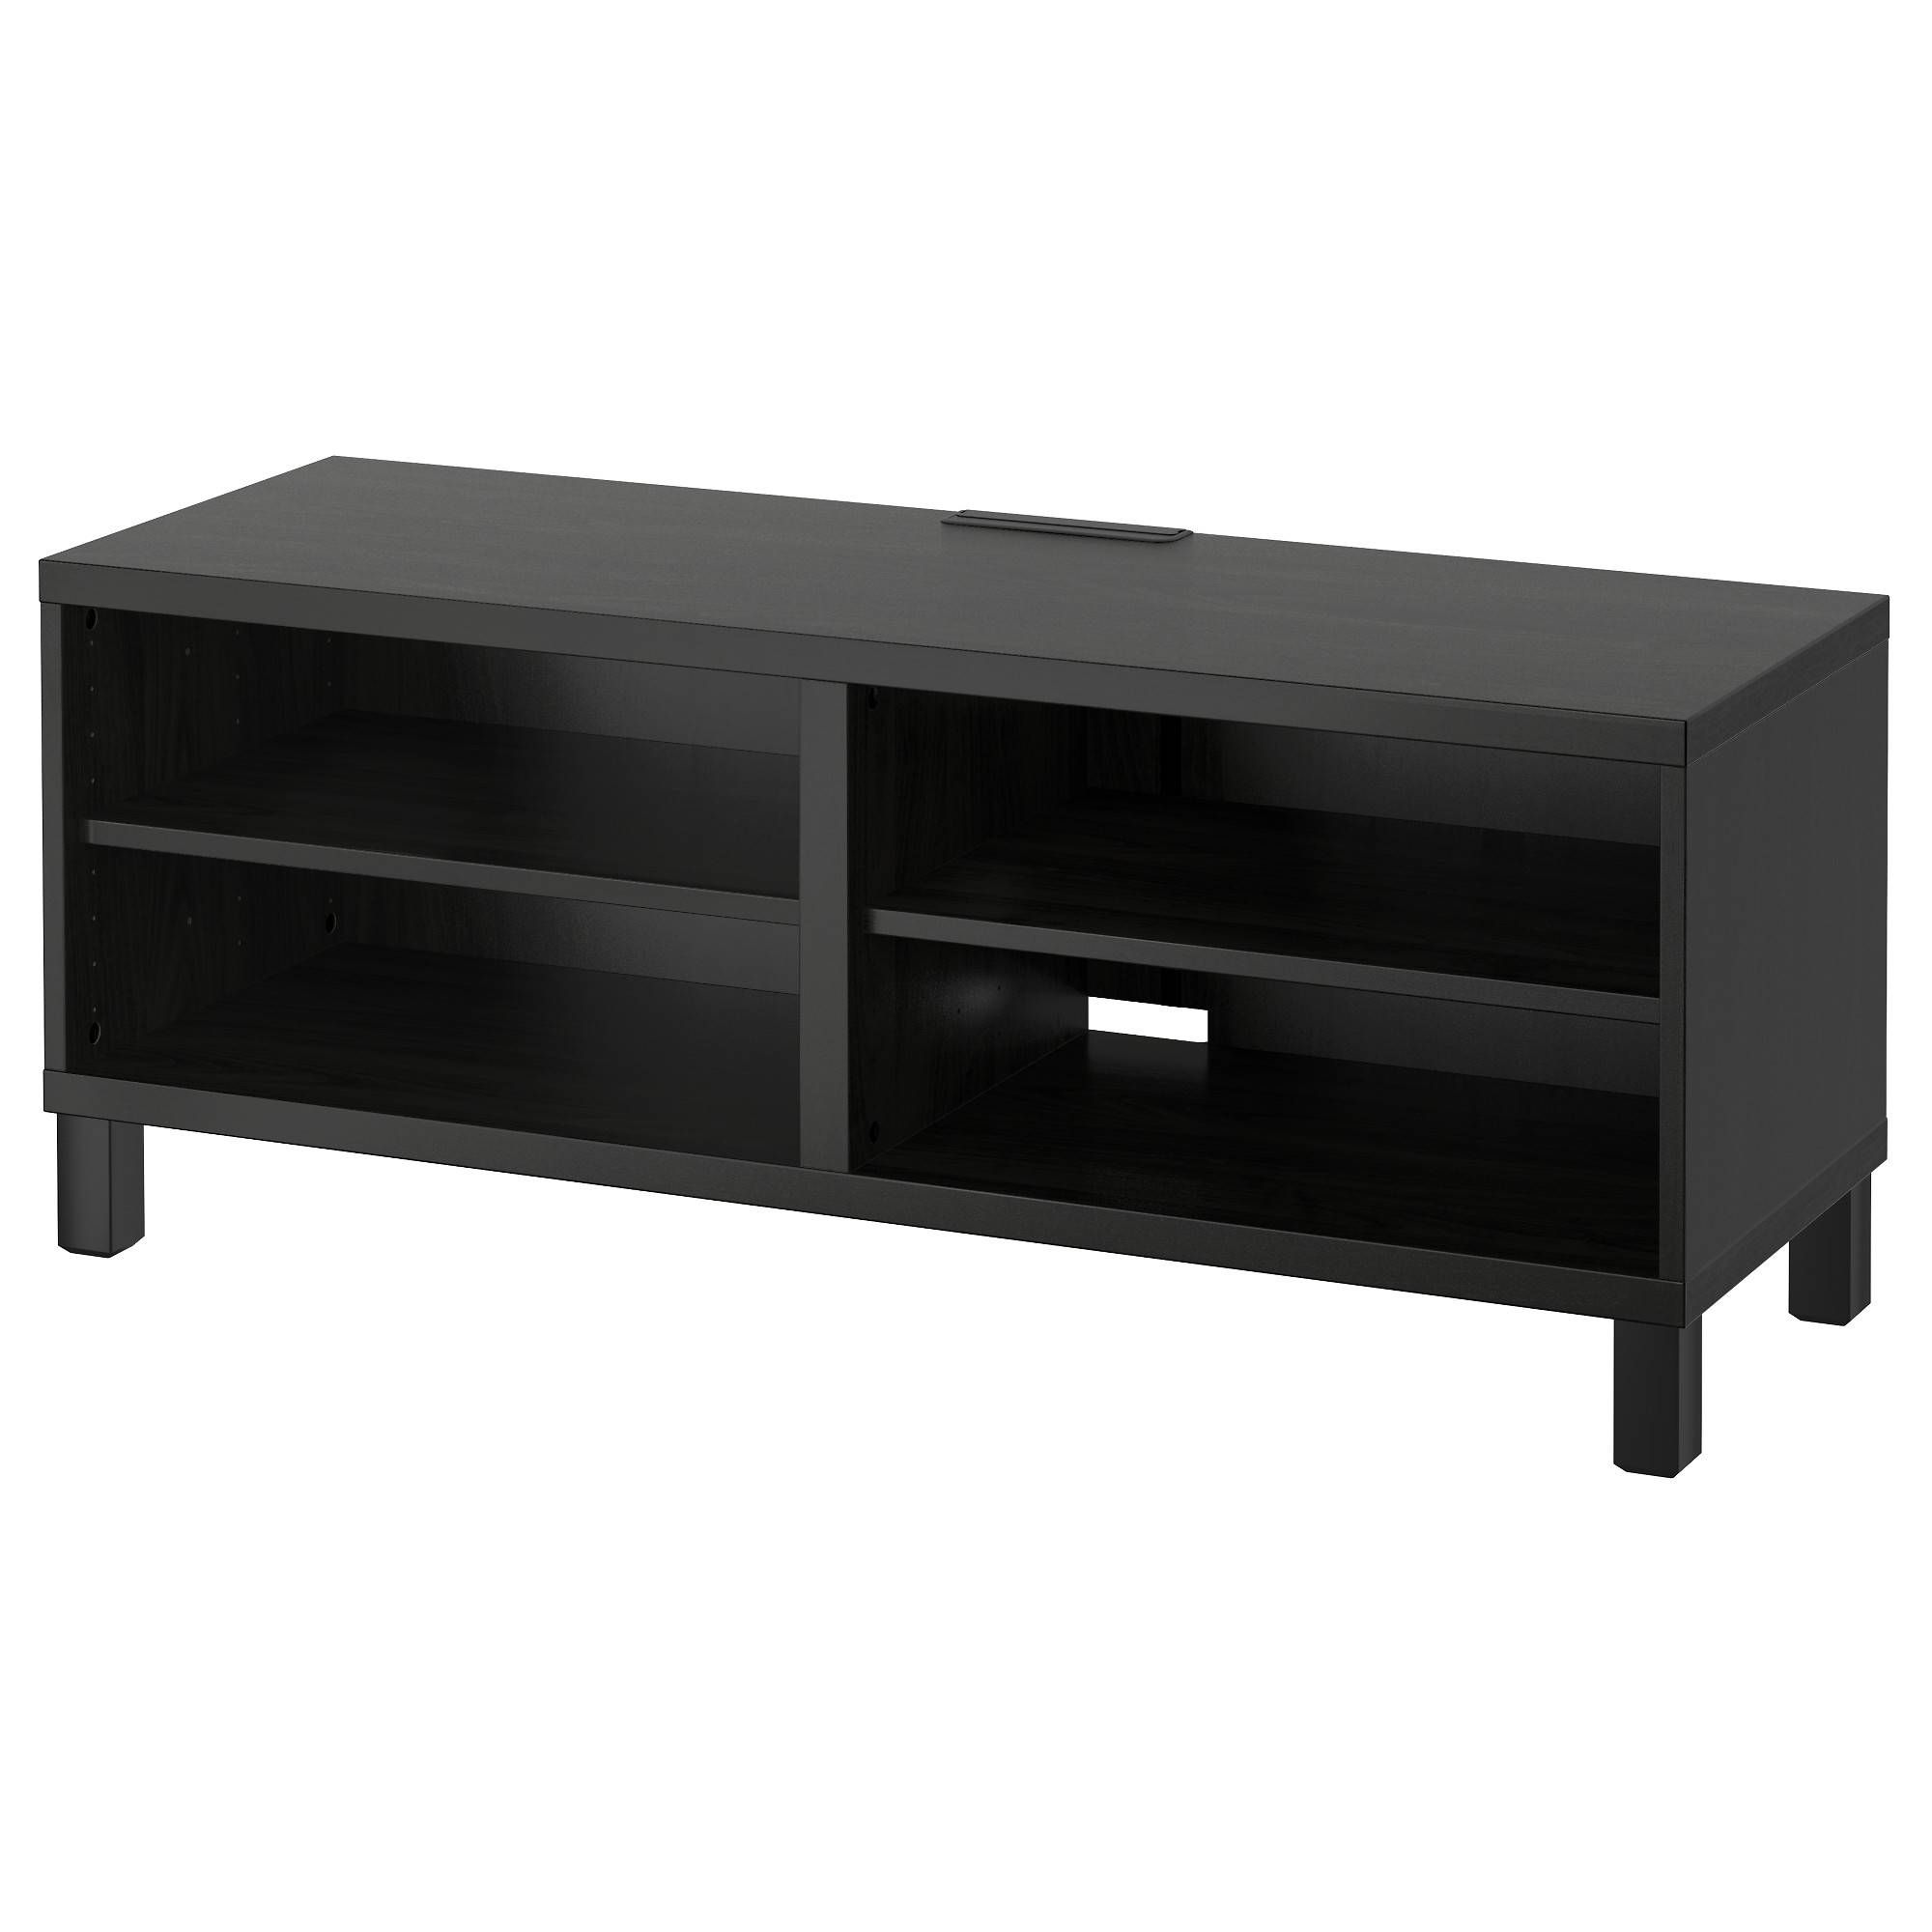 Large Tv Stands & Entertainment Centers – Ikea Inside 60 Cm High Tv Stand (View 9 of 15)